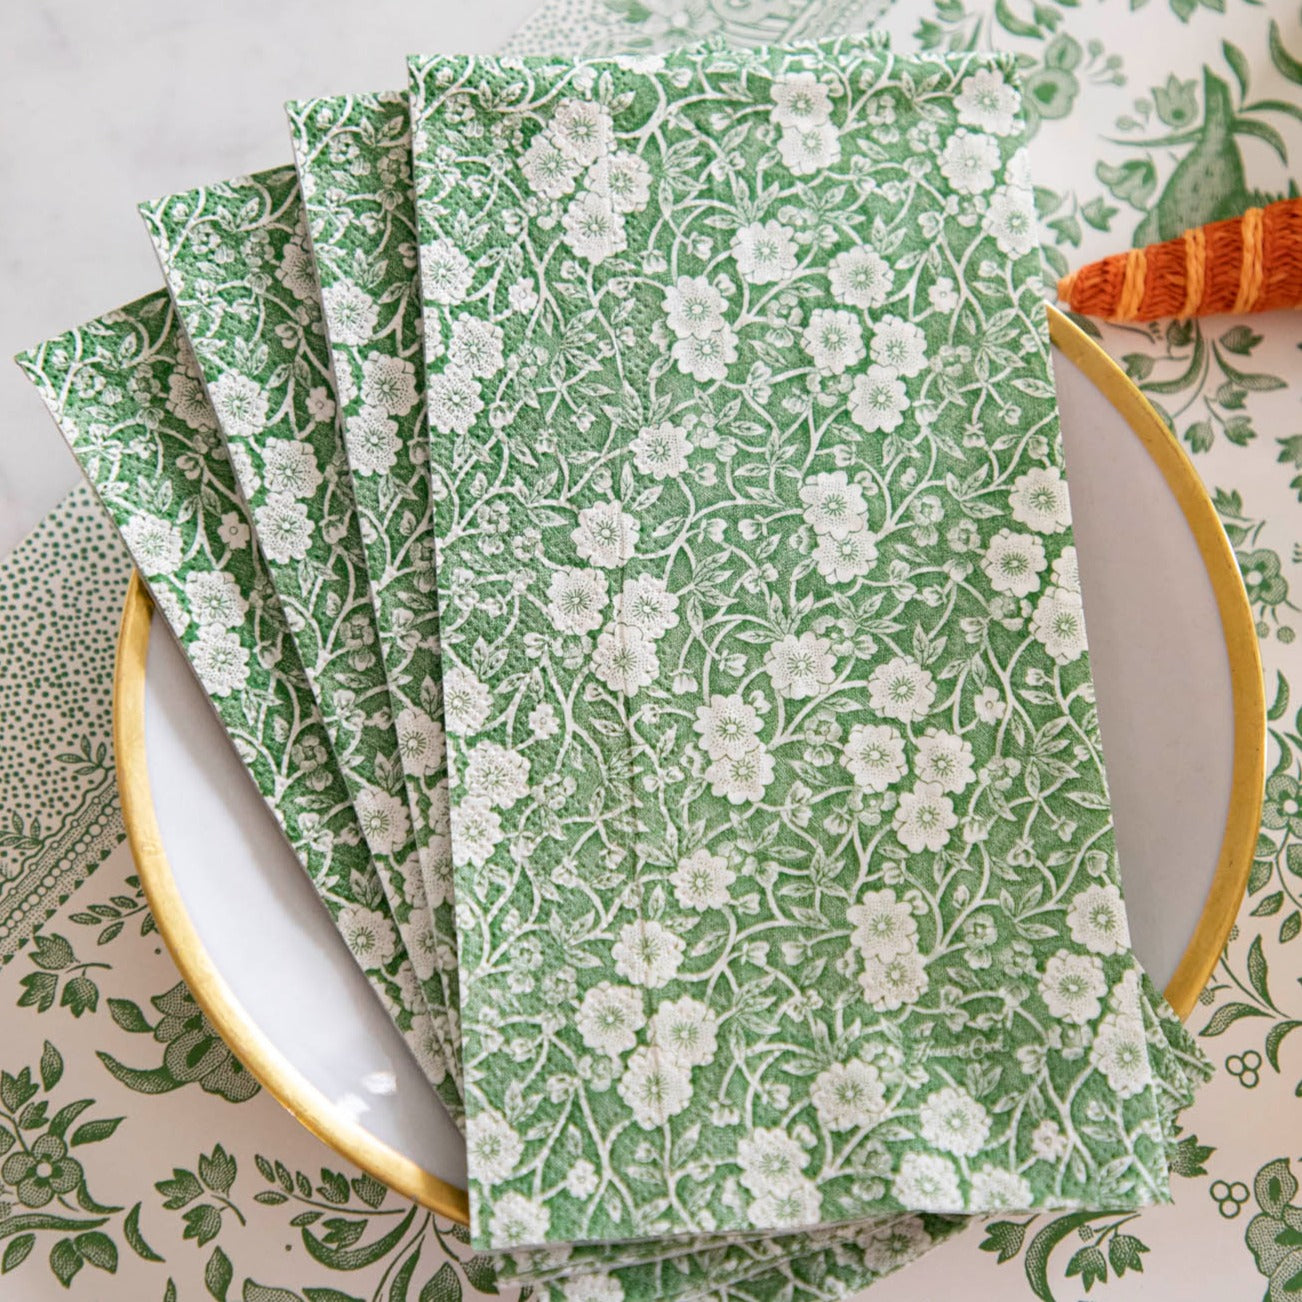 Four Green Calico Guest Napkins fanned out on a plate in an elegant table setting.